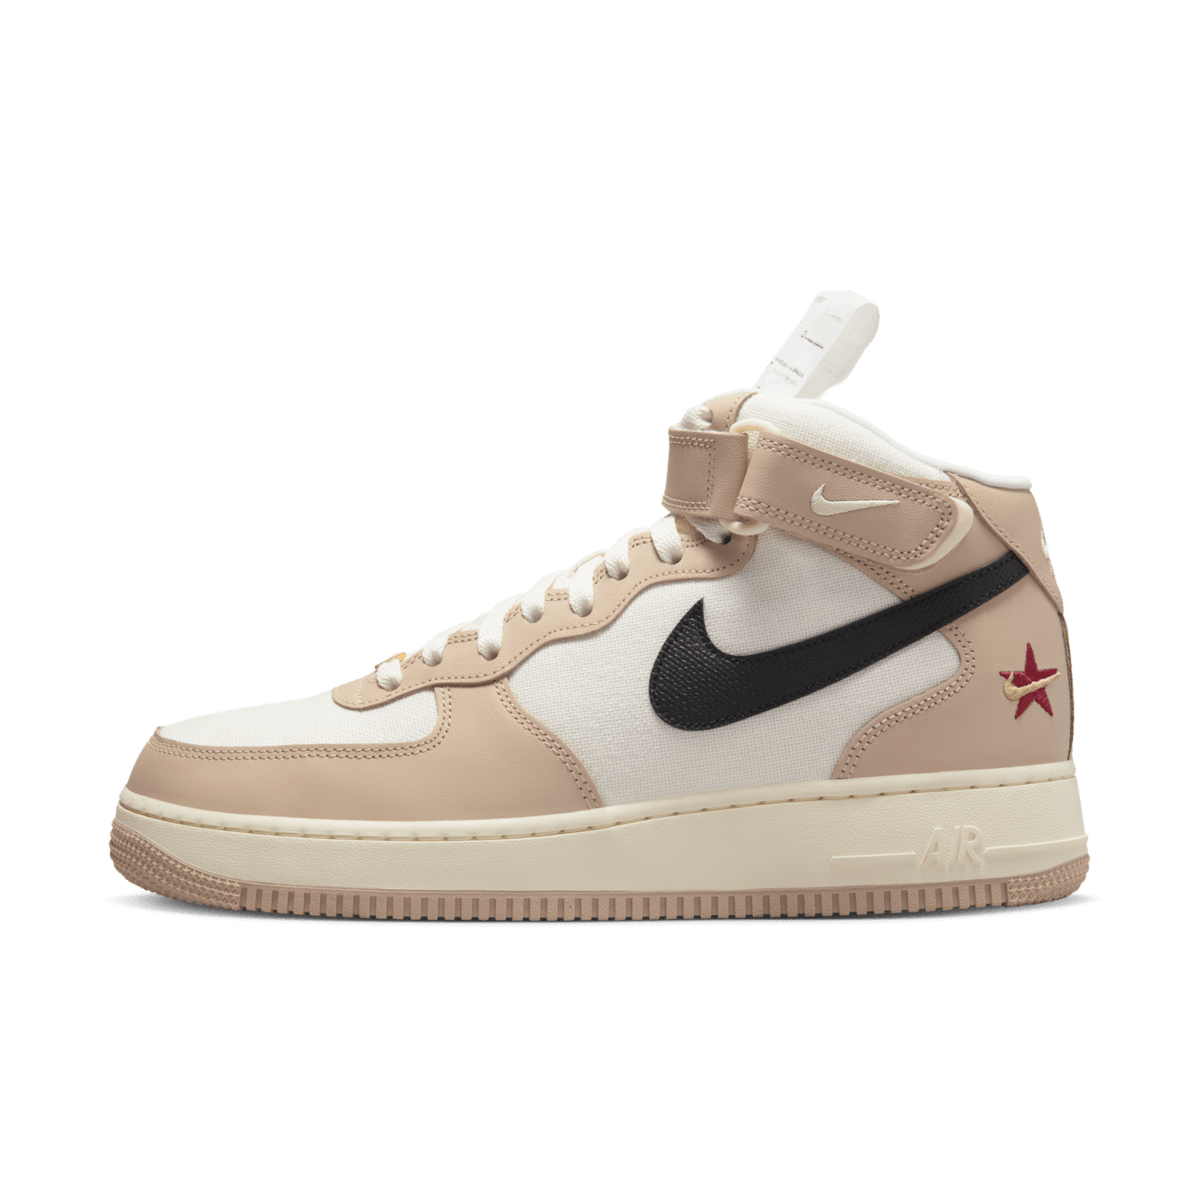 Nike Air Force 1 Mid 'Timeline' DX2938-200